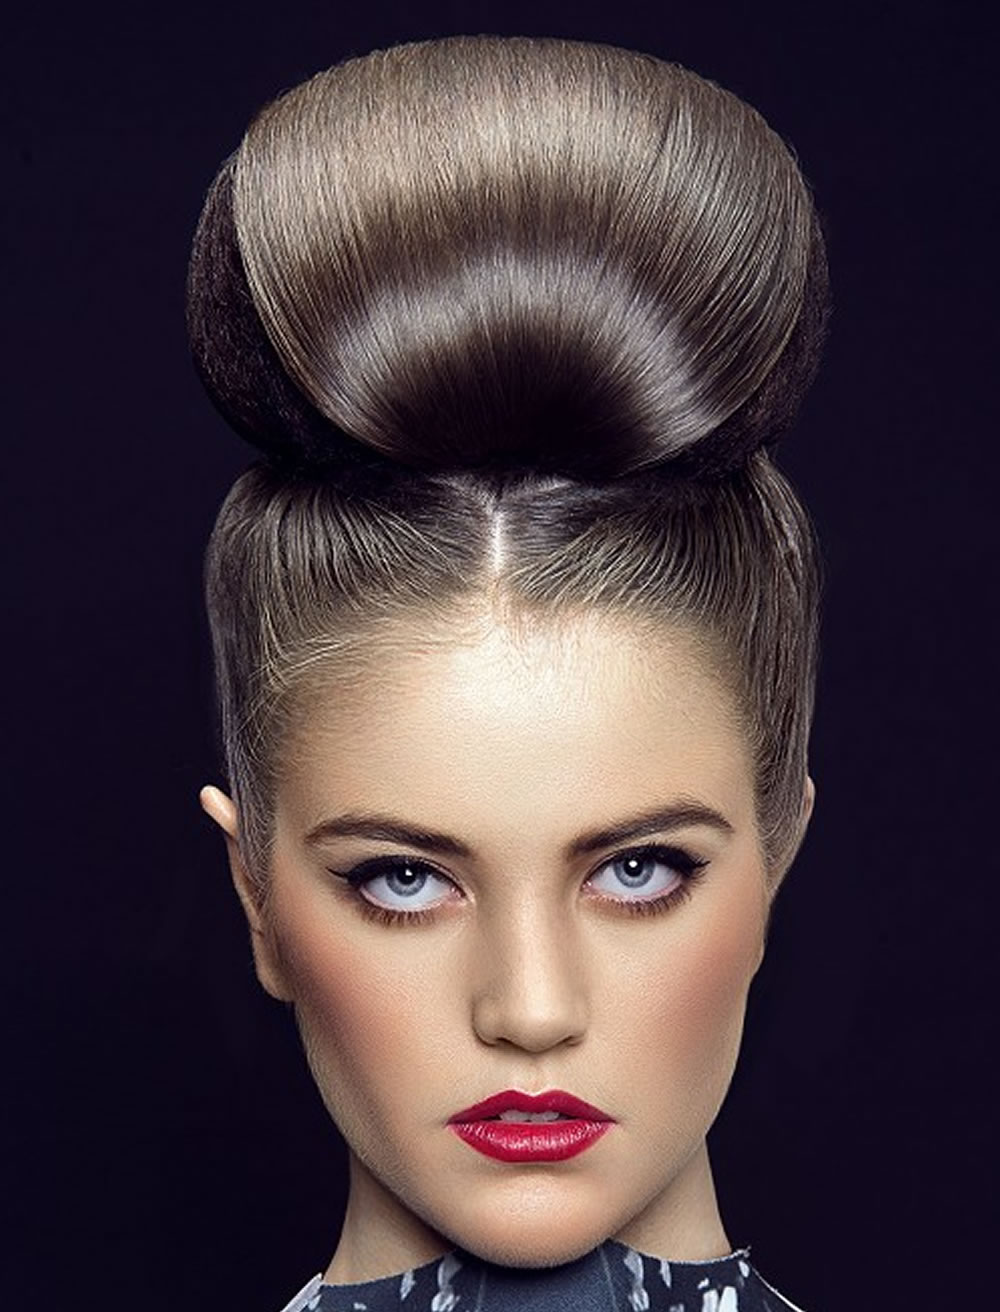 Updo Hairstyles For Round, Square Oval Faces 2018 - 2019